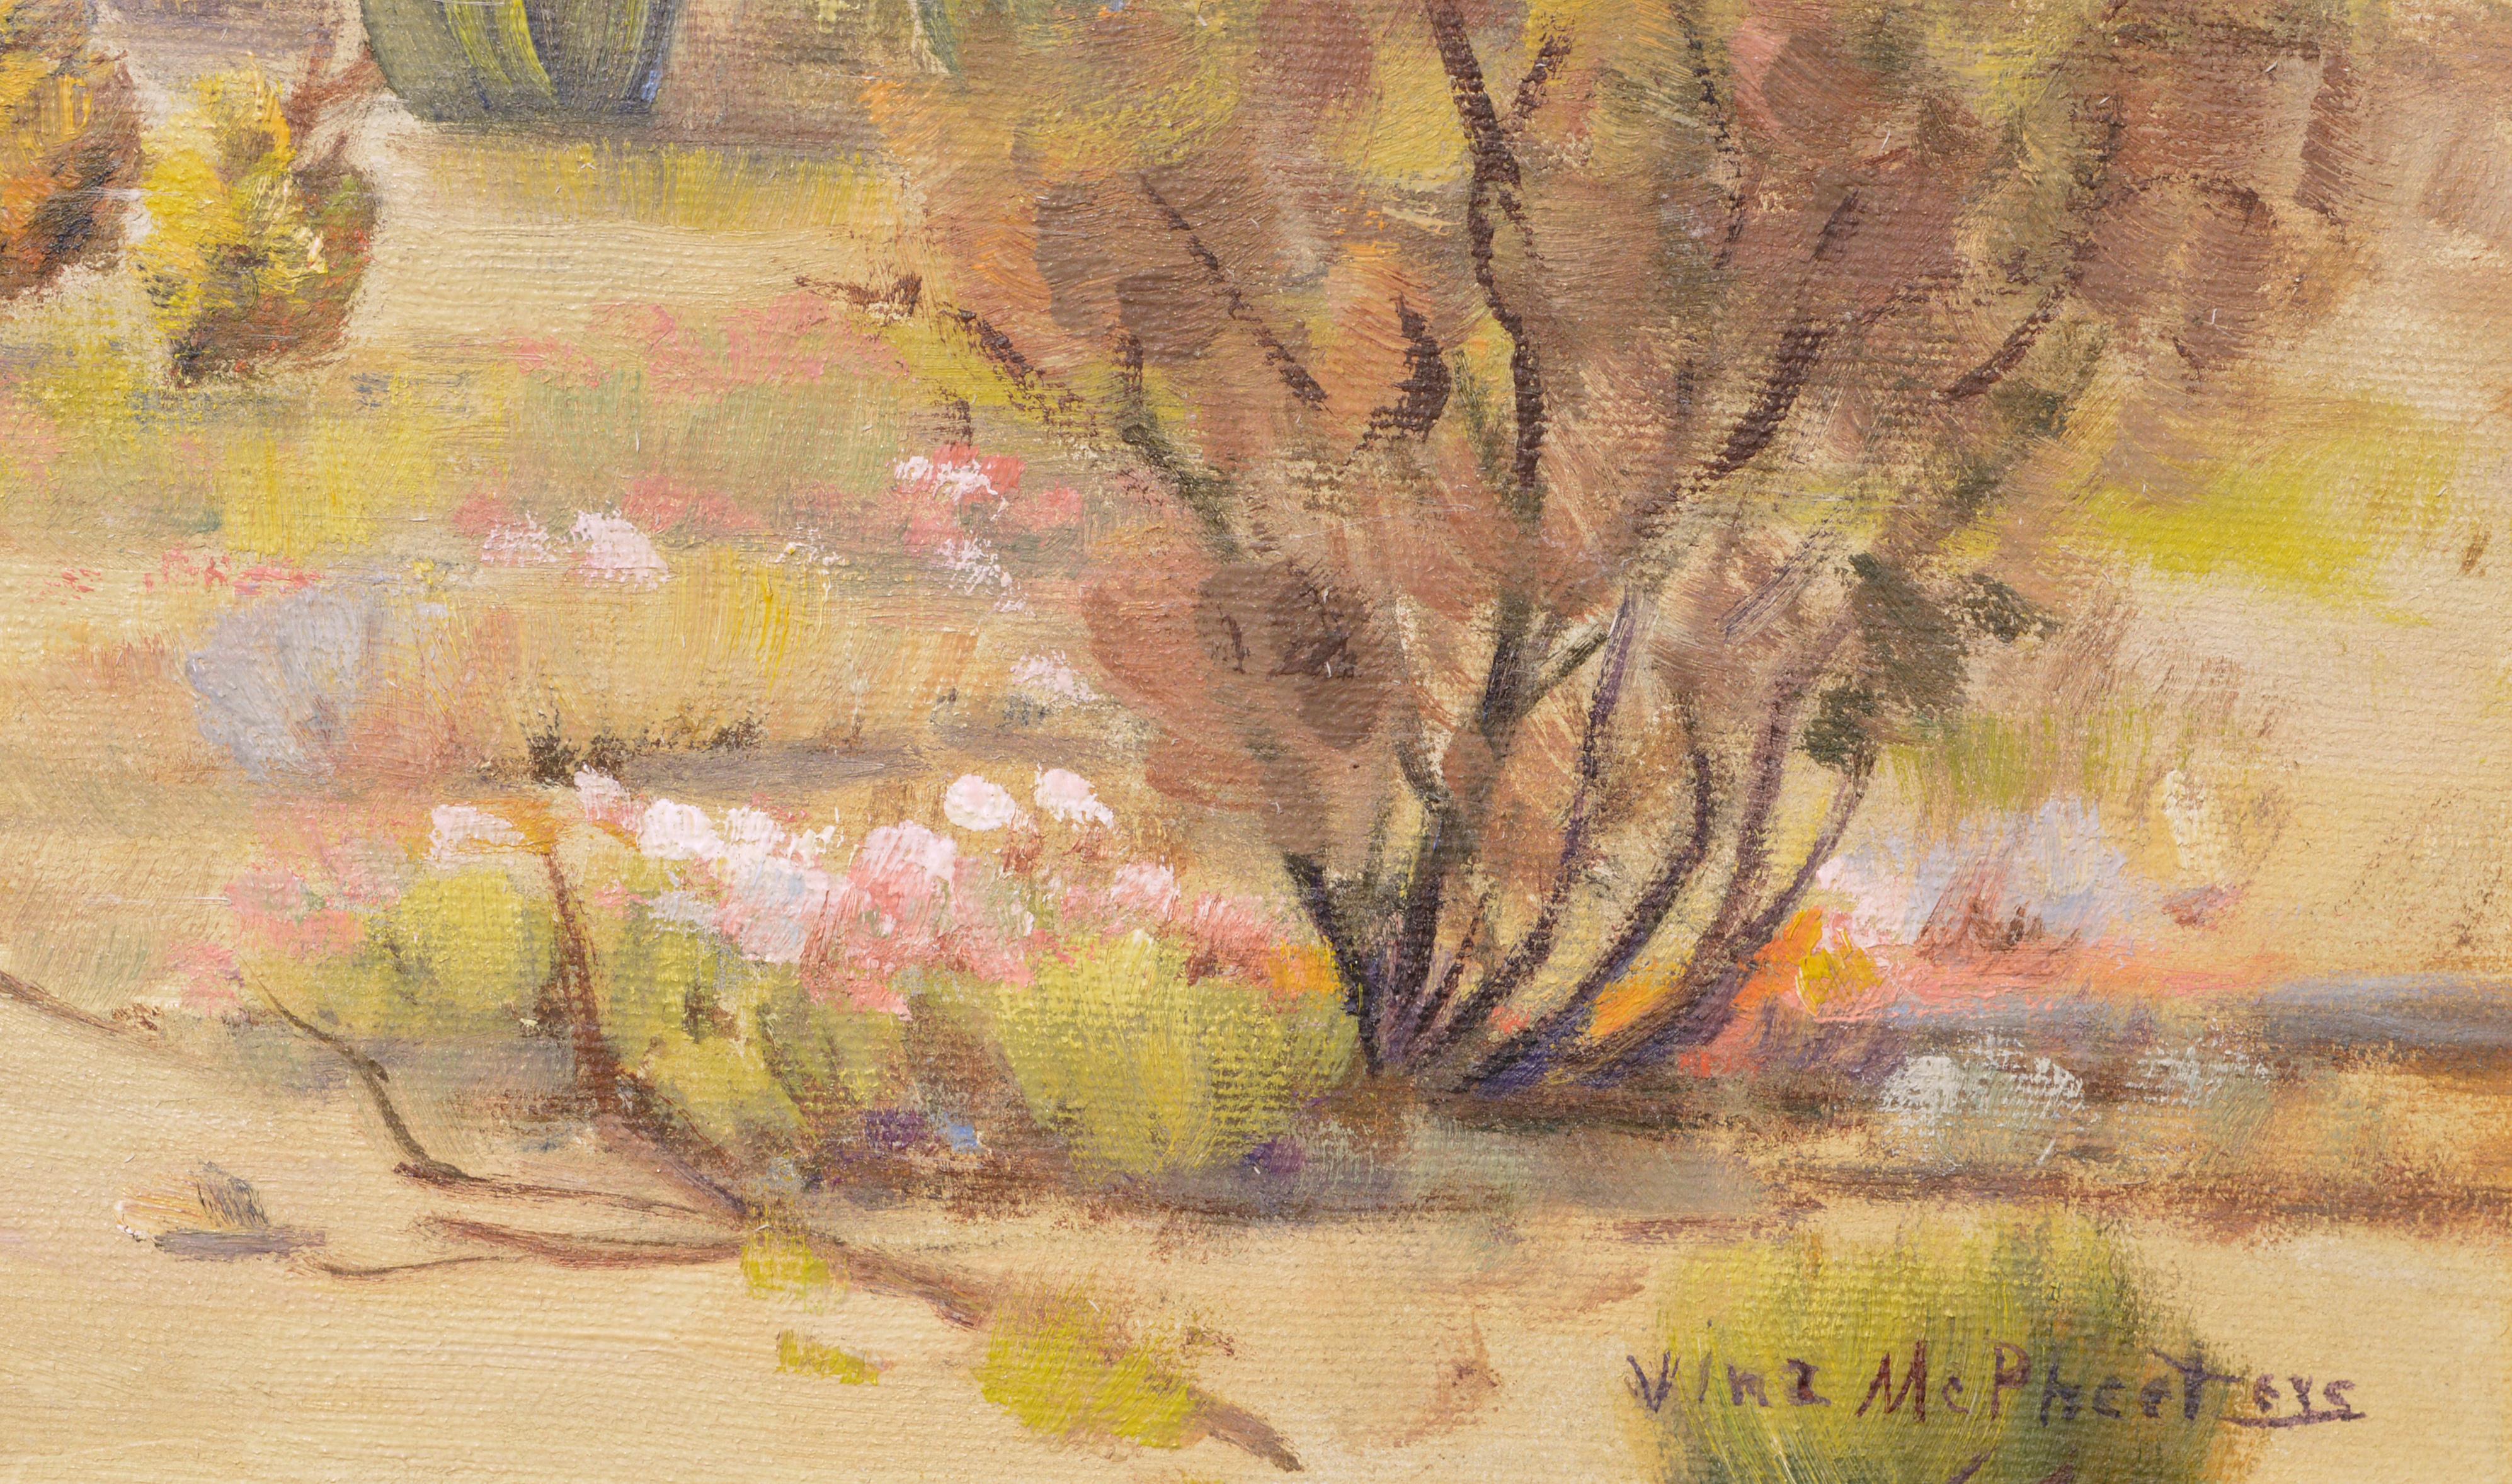 Mid Century Desert Mesa Landscape with Cacti  - American Impressionist Painting by Vina McPheeters